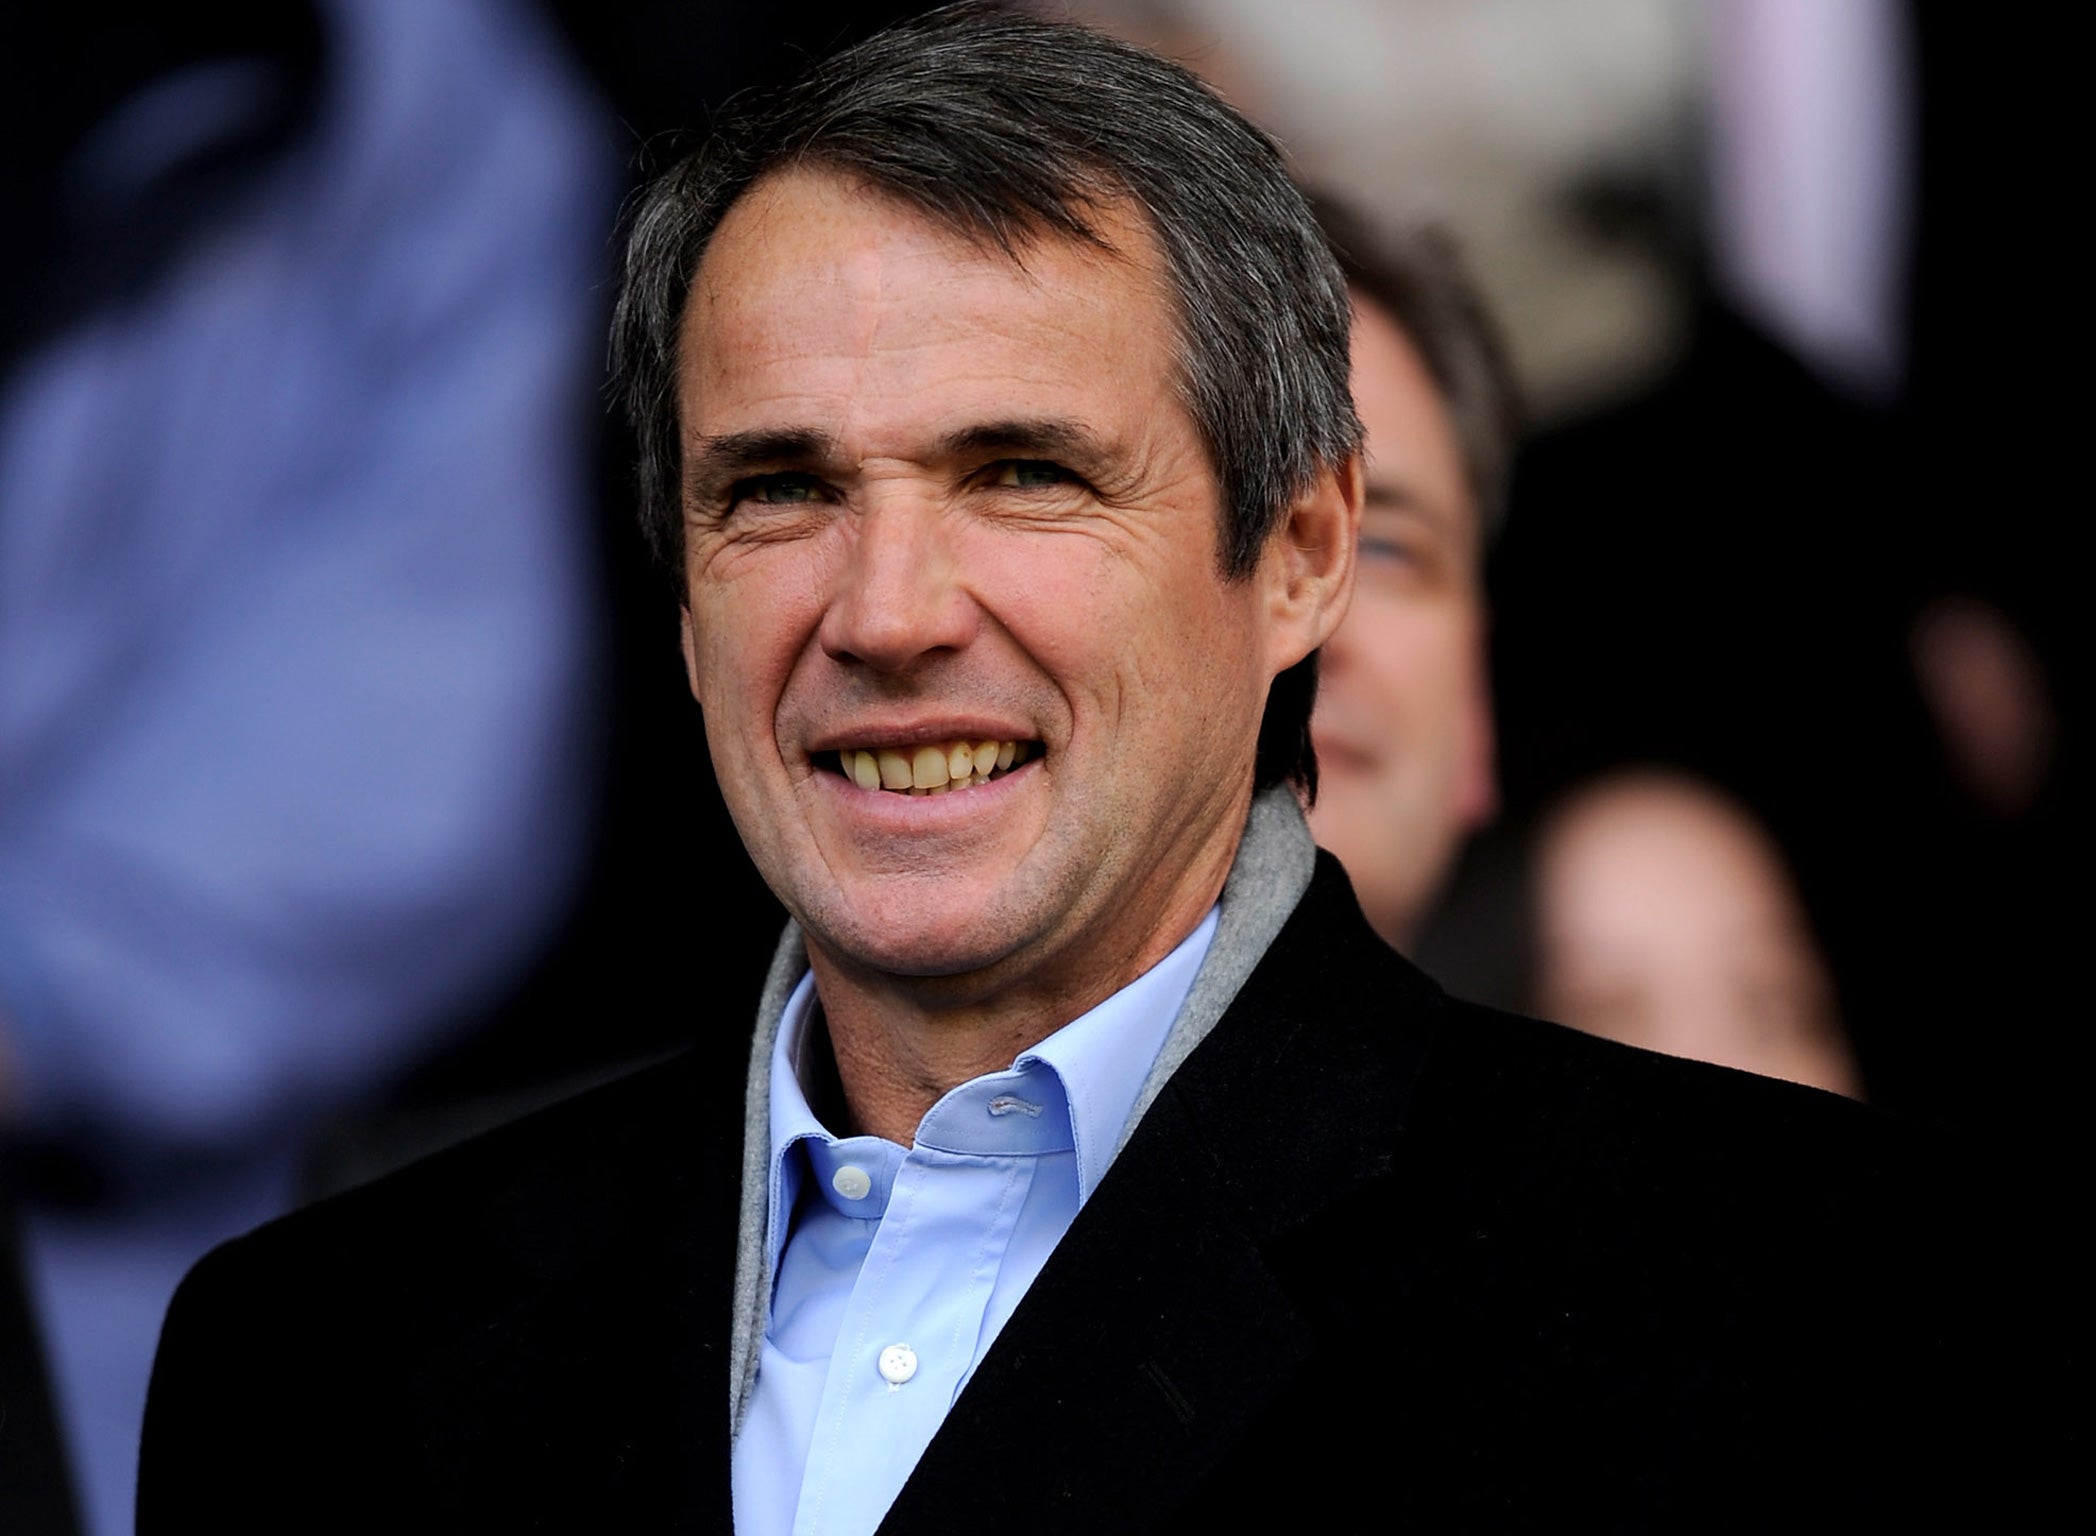 The fact that there was not a single goalless draw in any of the English or Scottish Leagues last weekend would seem to give credence to rants by Alan Hansen, pictured, about bad defending